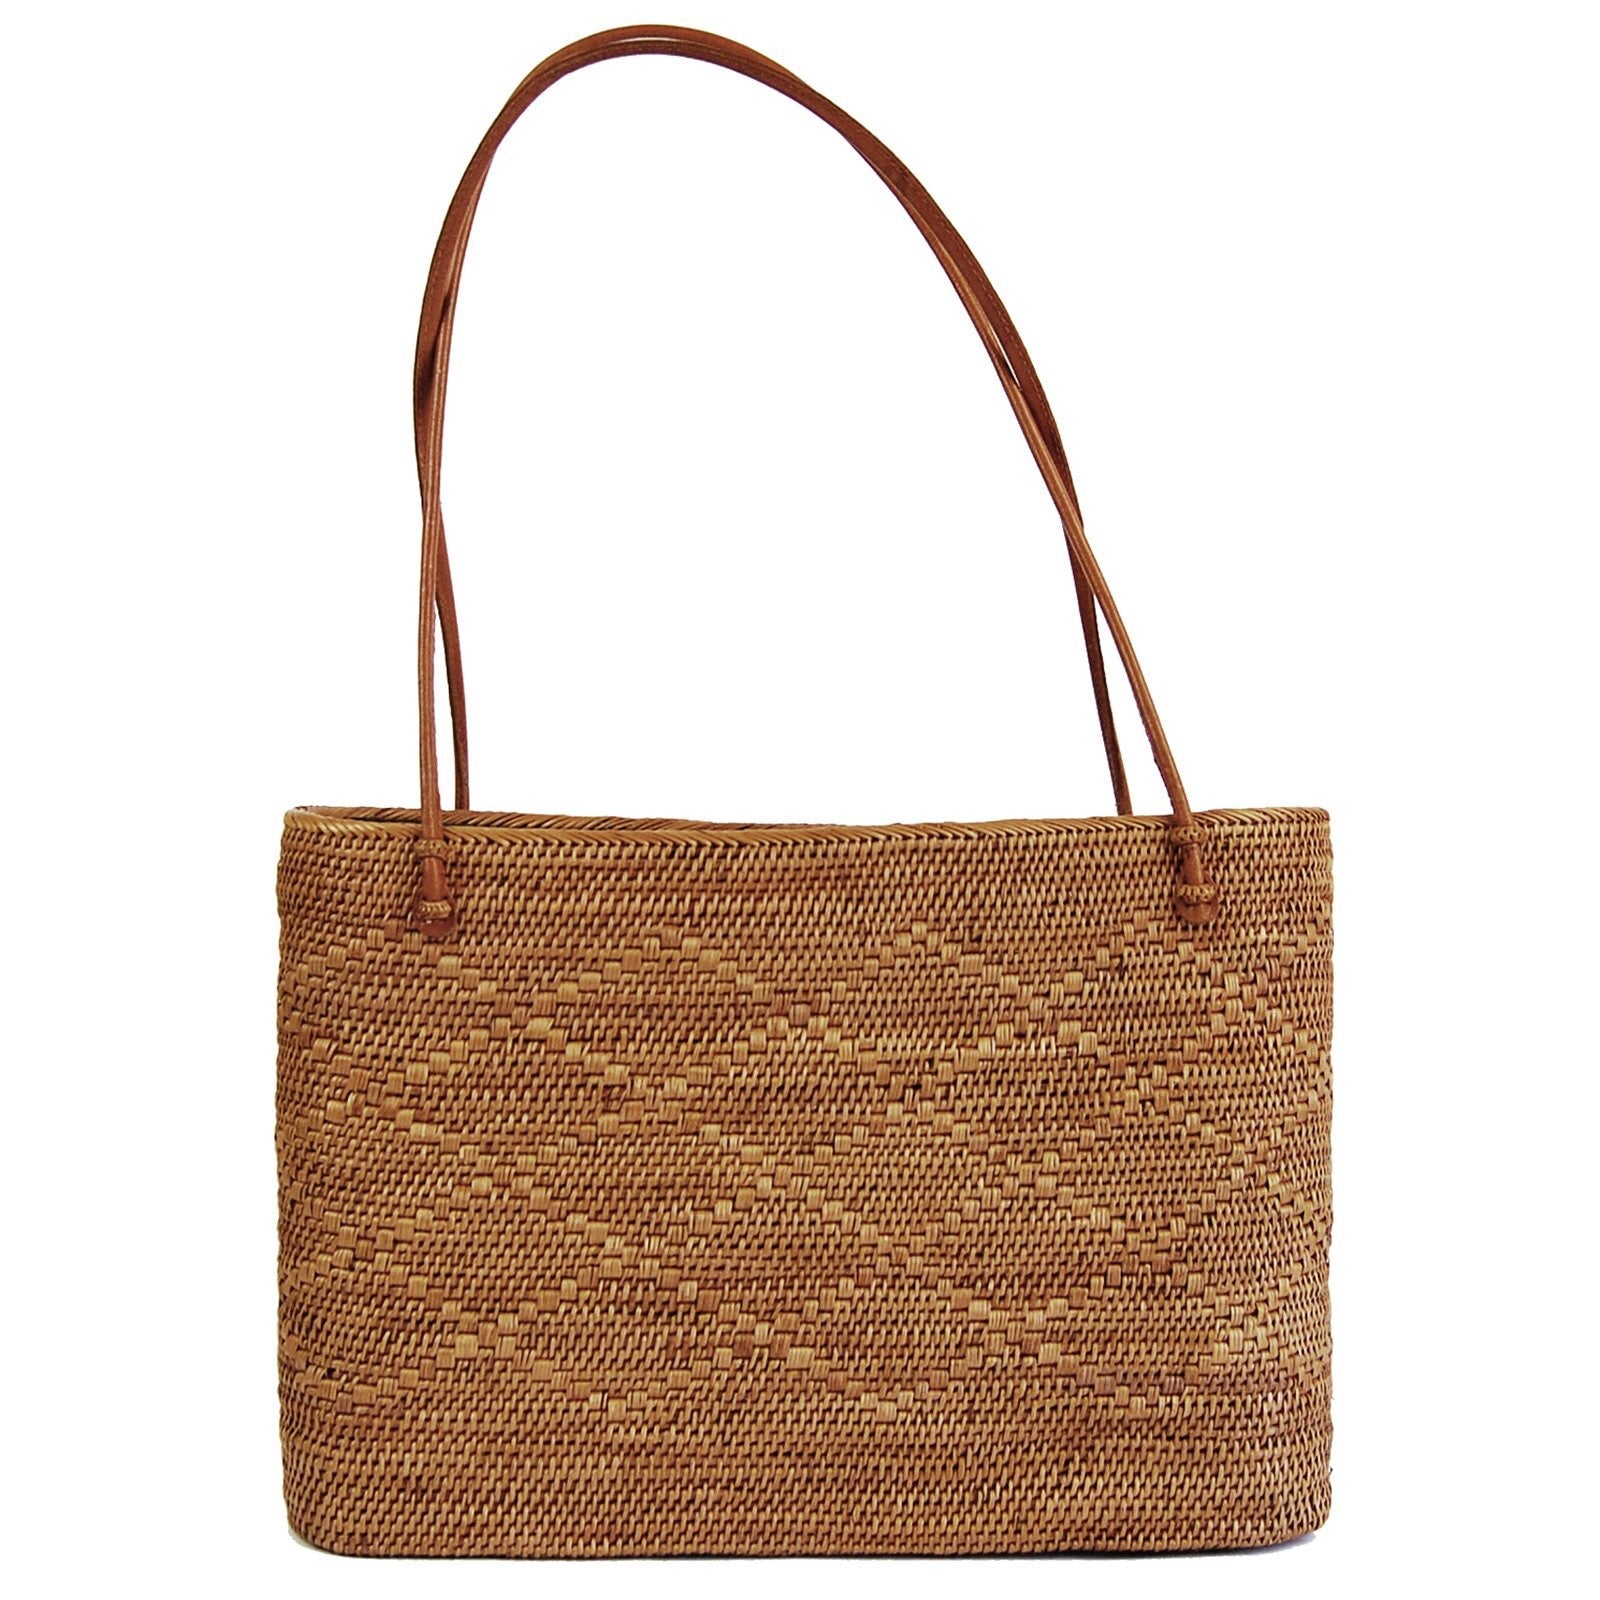 Hancock Baskets Peggy Fisher Beach Tote